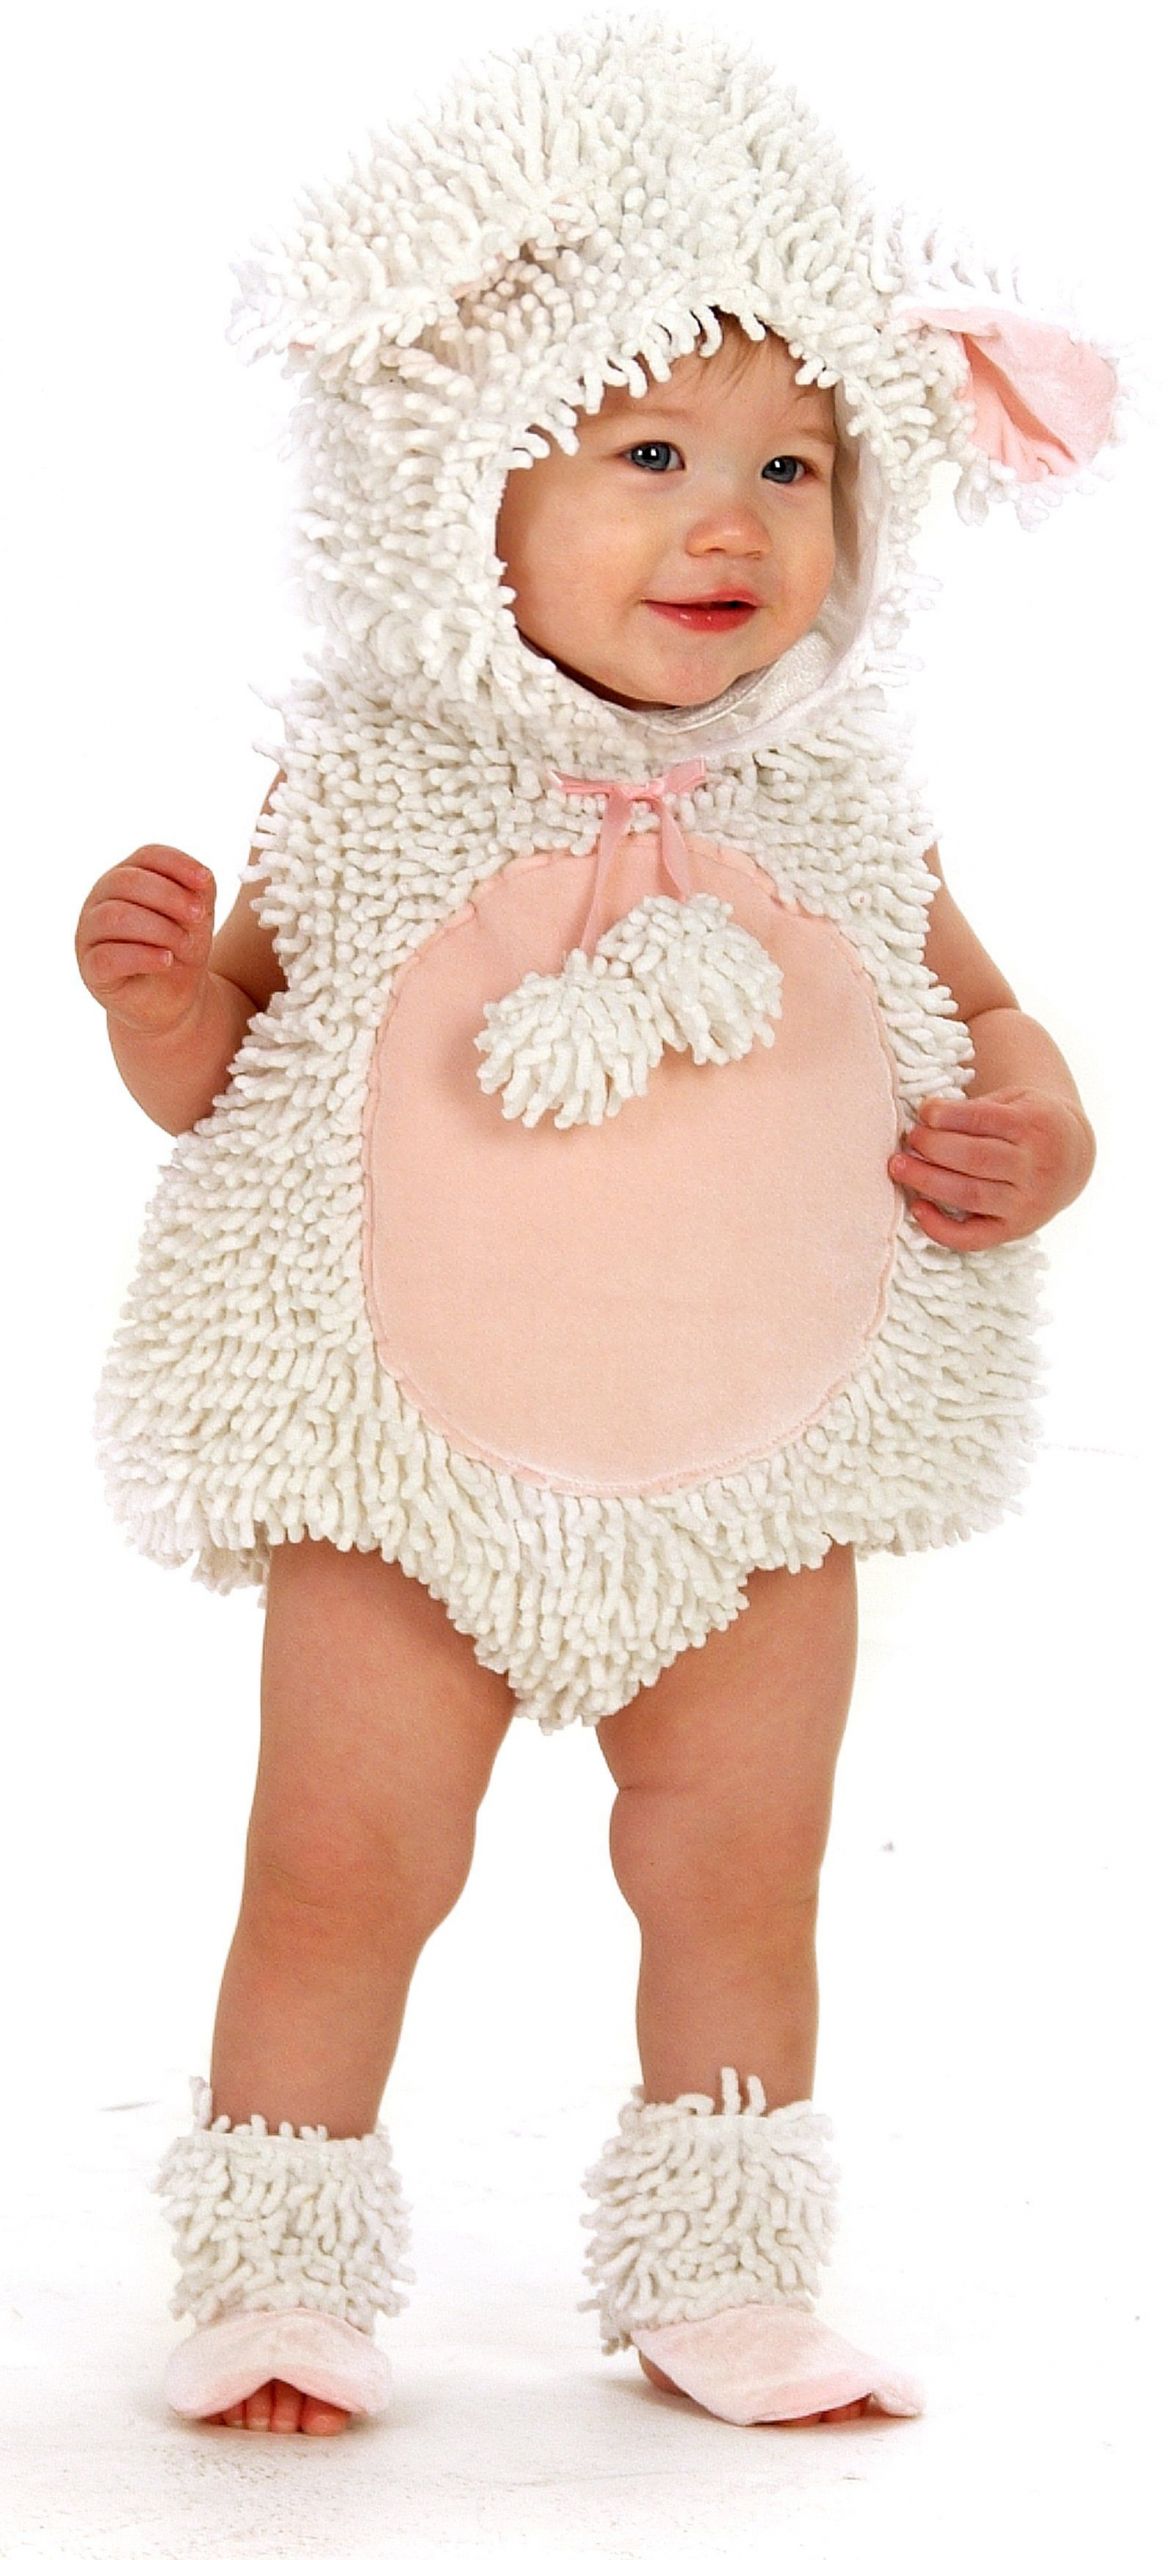 Easter Party Costume Ideas
 Cute Easter Costumes for Kids Infants and Newborns